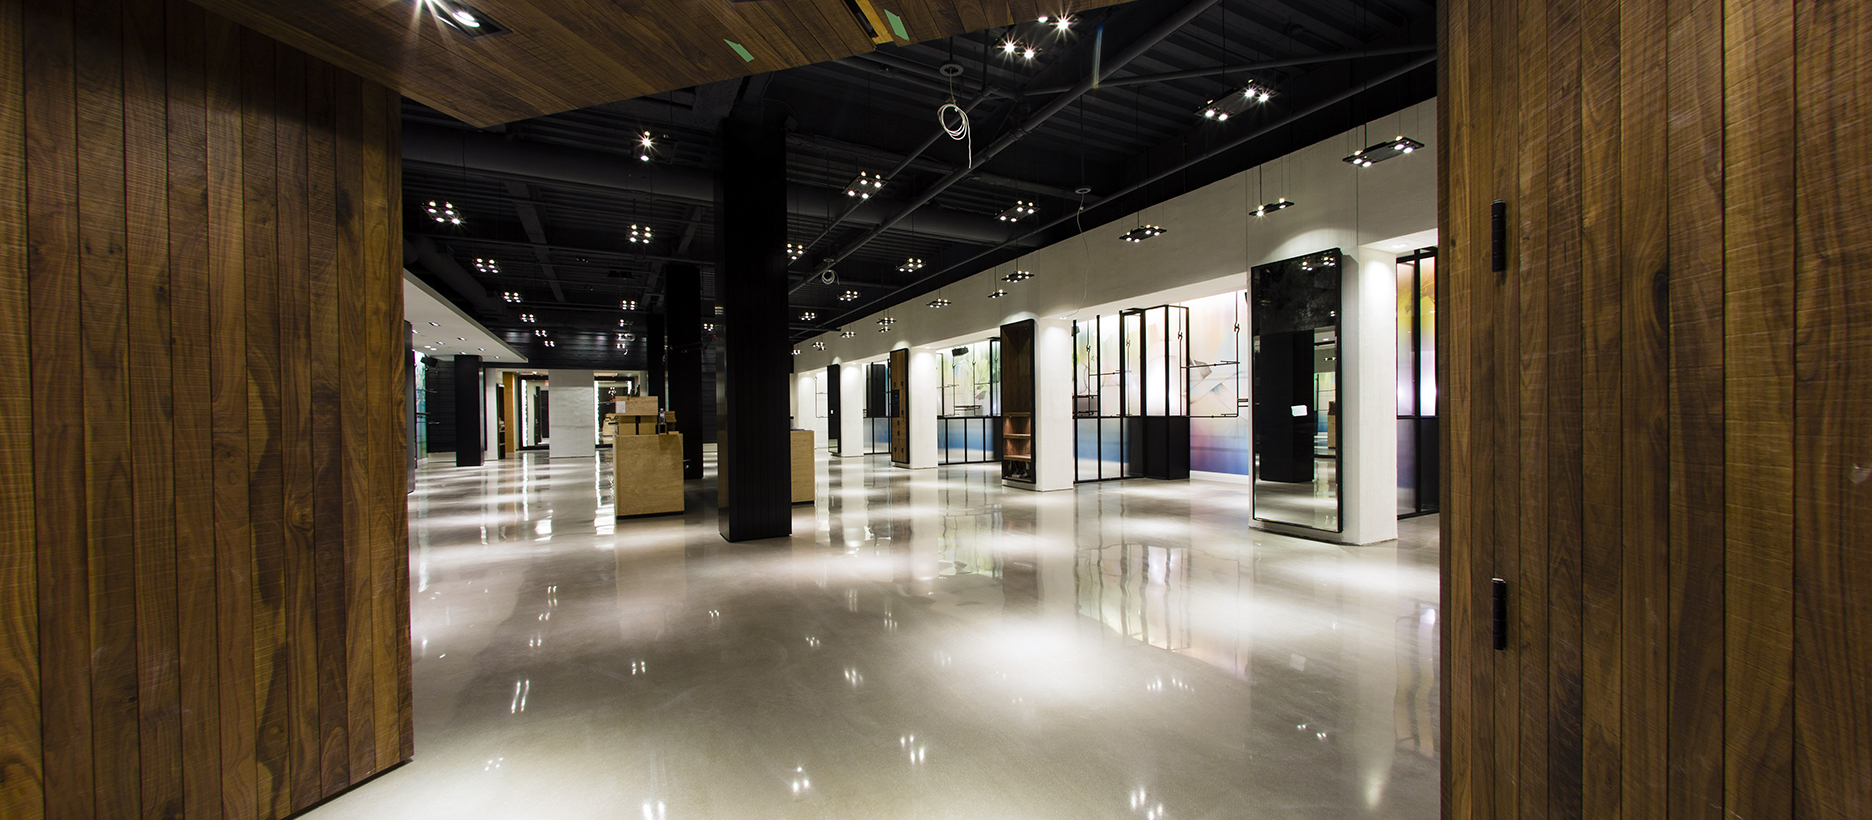 ARDEX Polished concrete systems